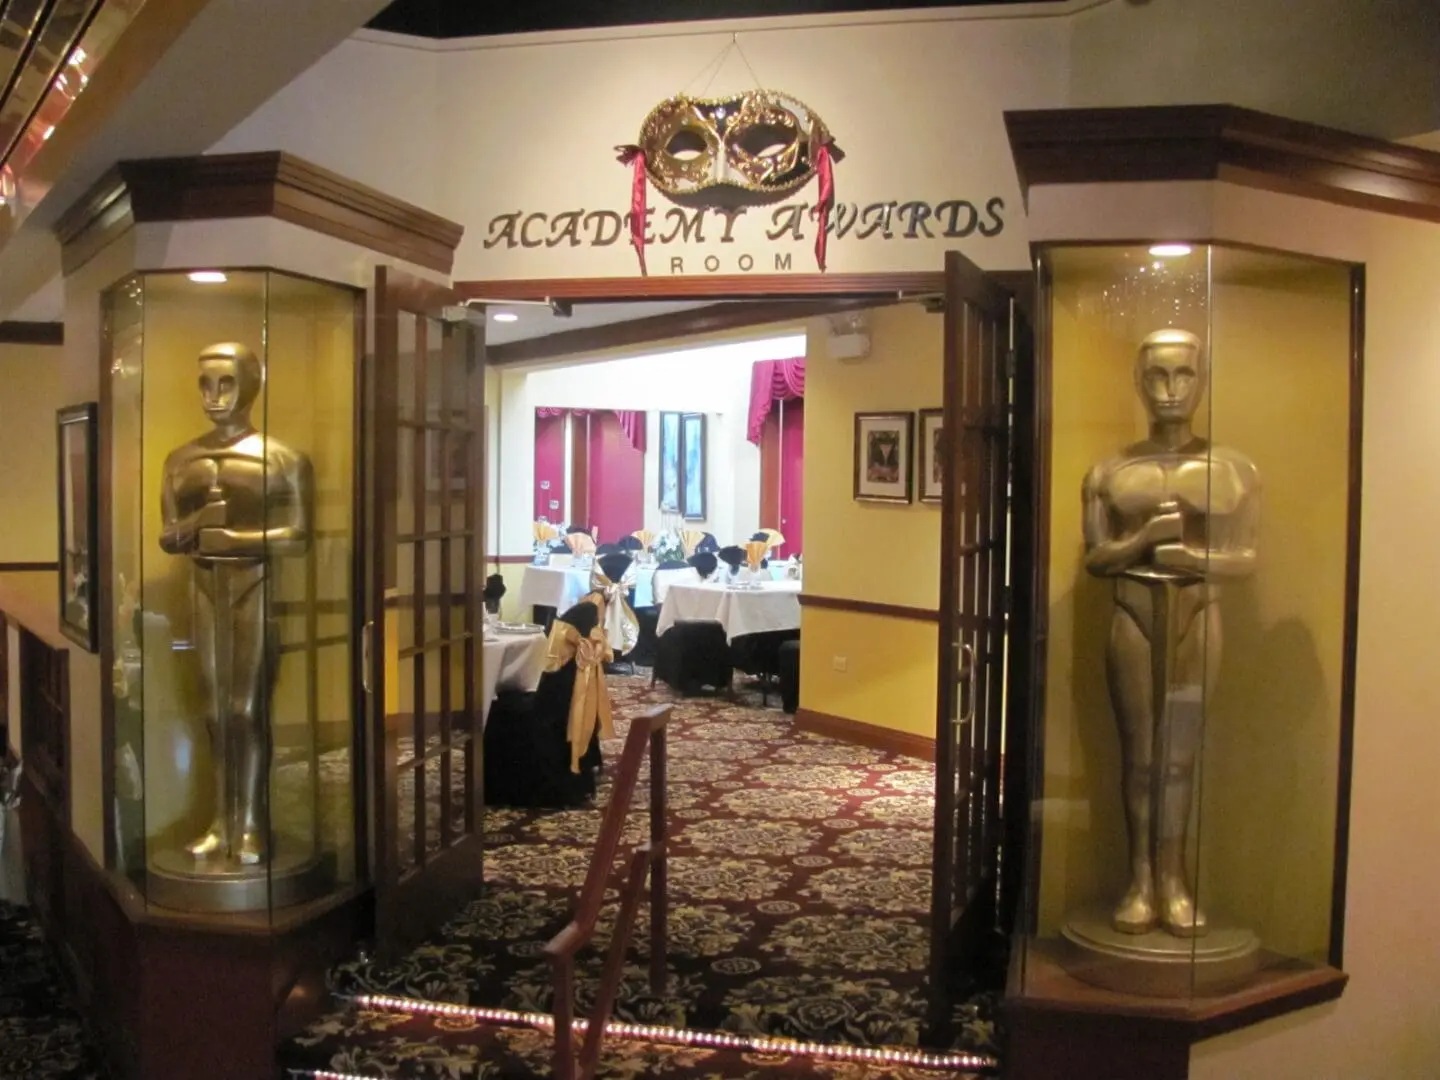 A restaurant with two statues of the oscars.